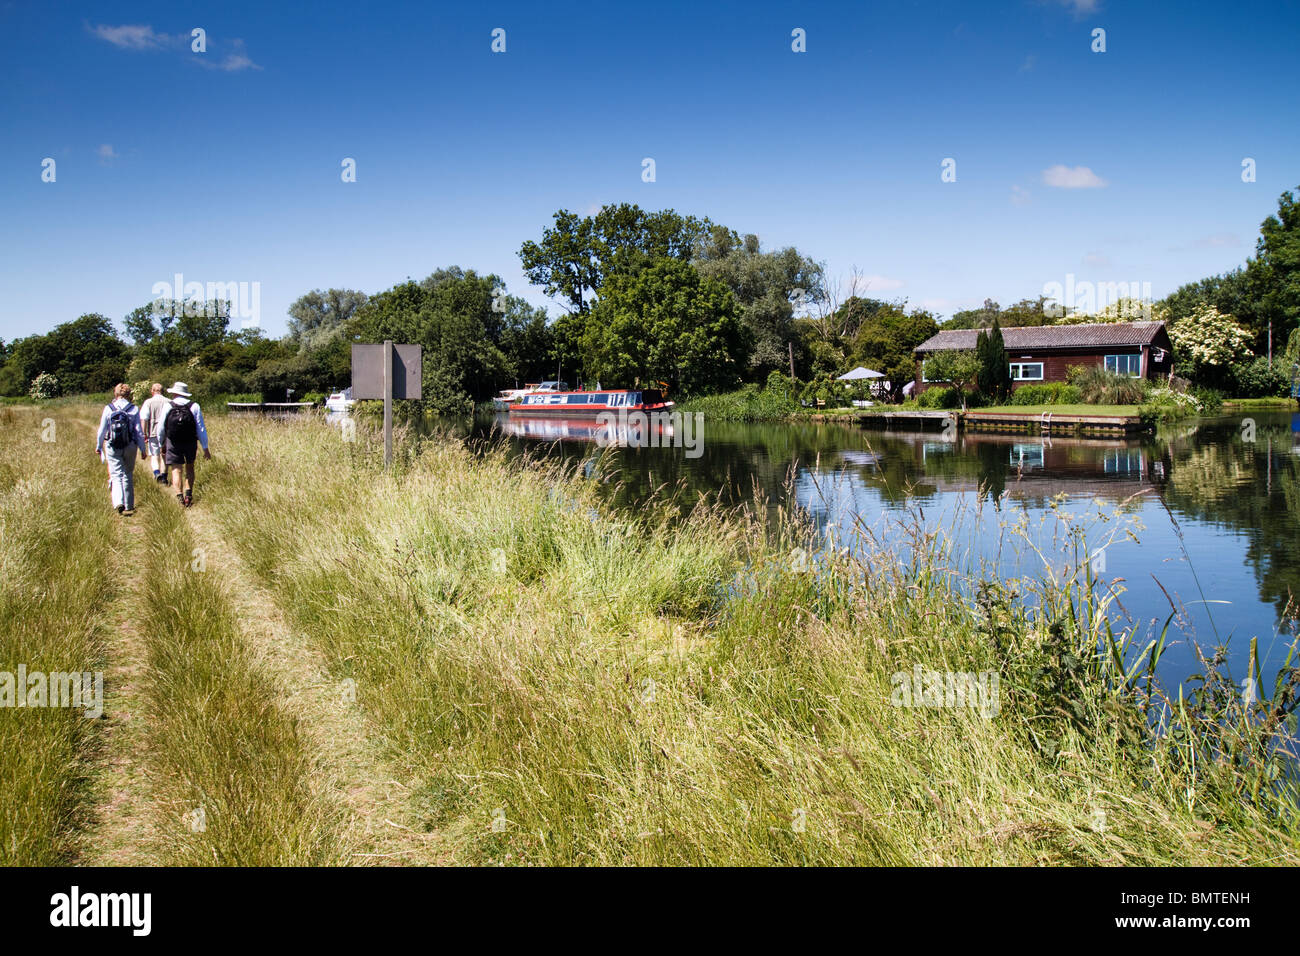 The River 'Great Ouse' People Walking Along The Riverbank, The River Ouse Cambridgeshire England UK Stock Photo